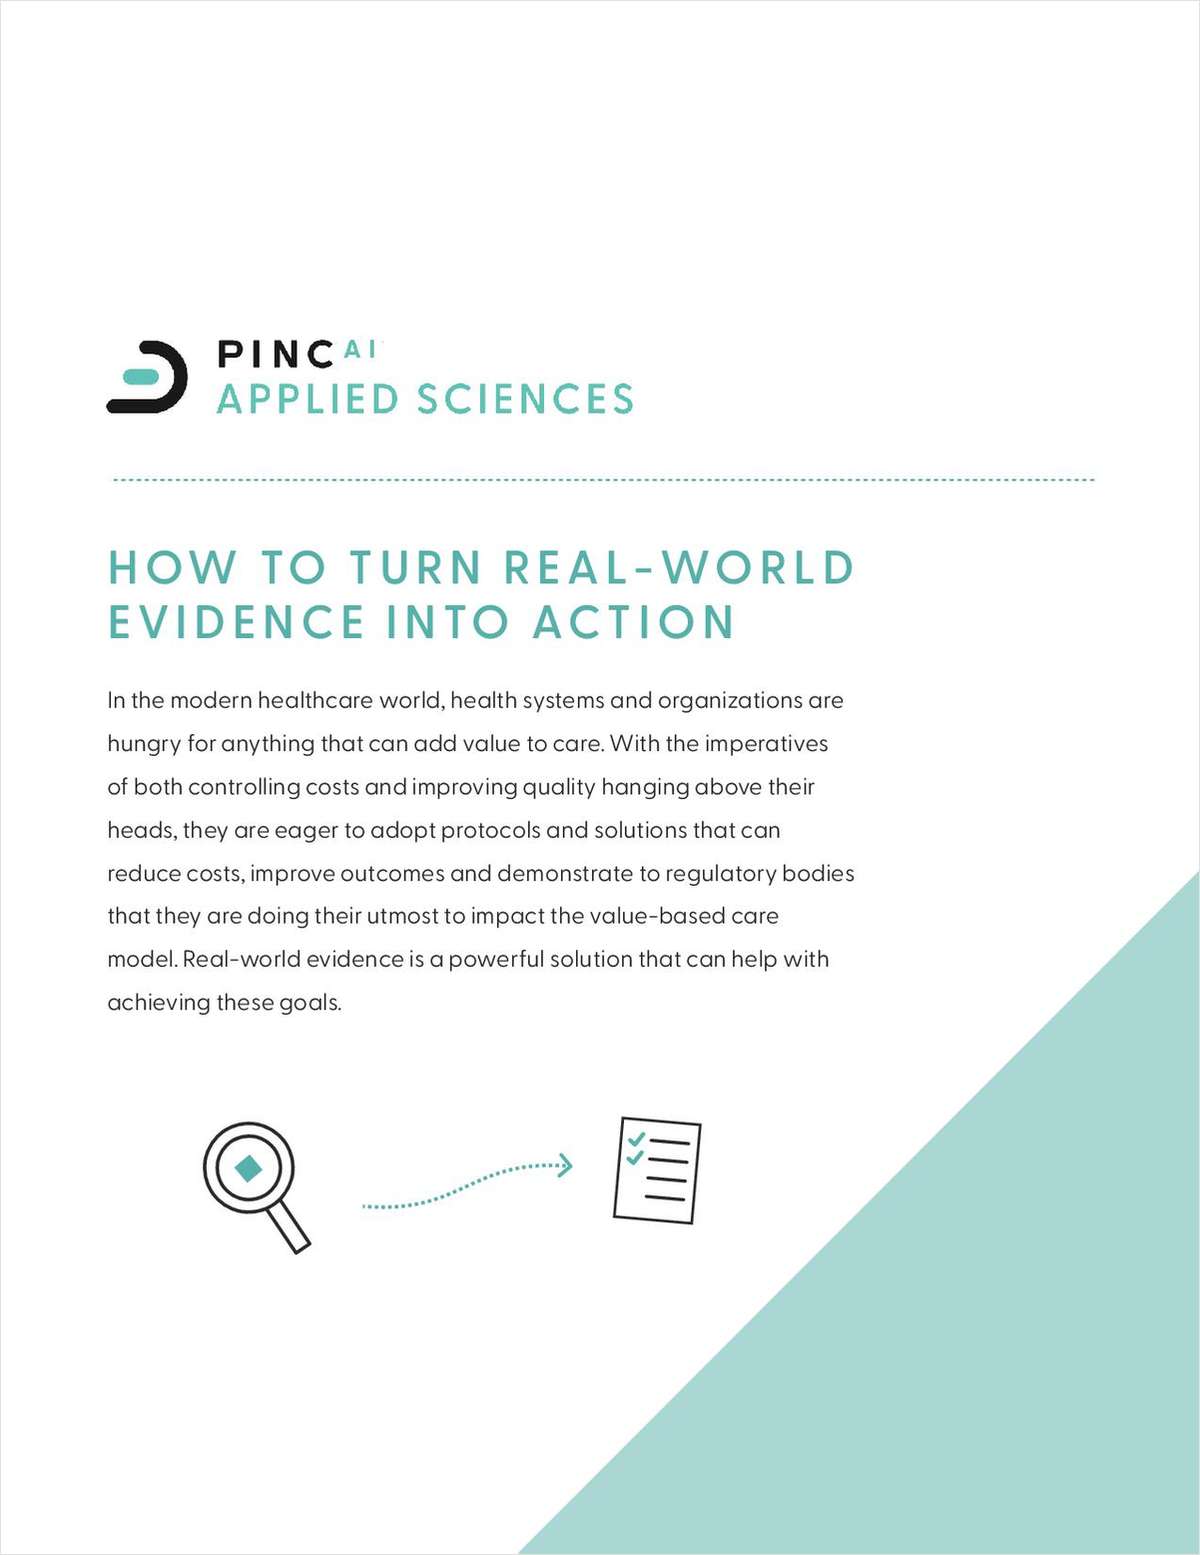 How to Turn Real-World Evidence into Action